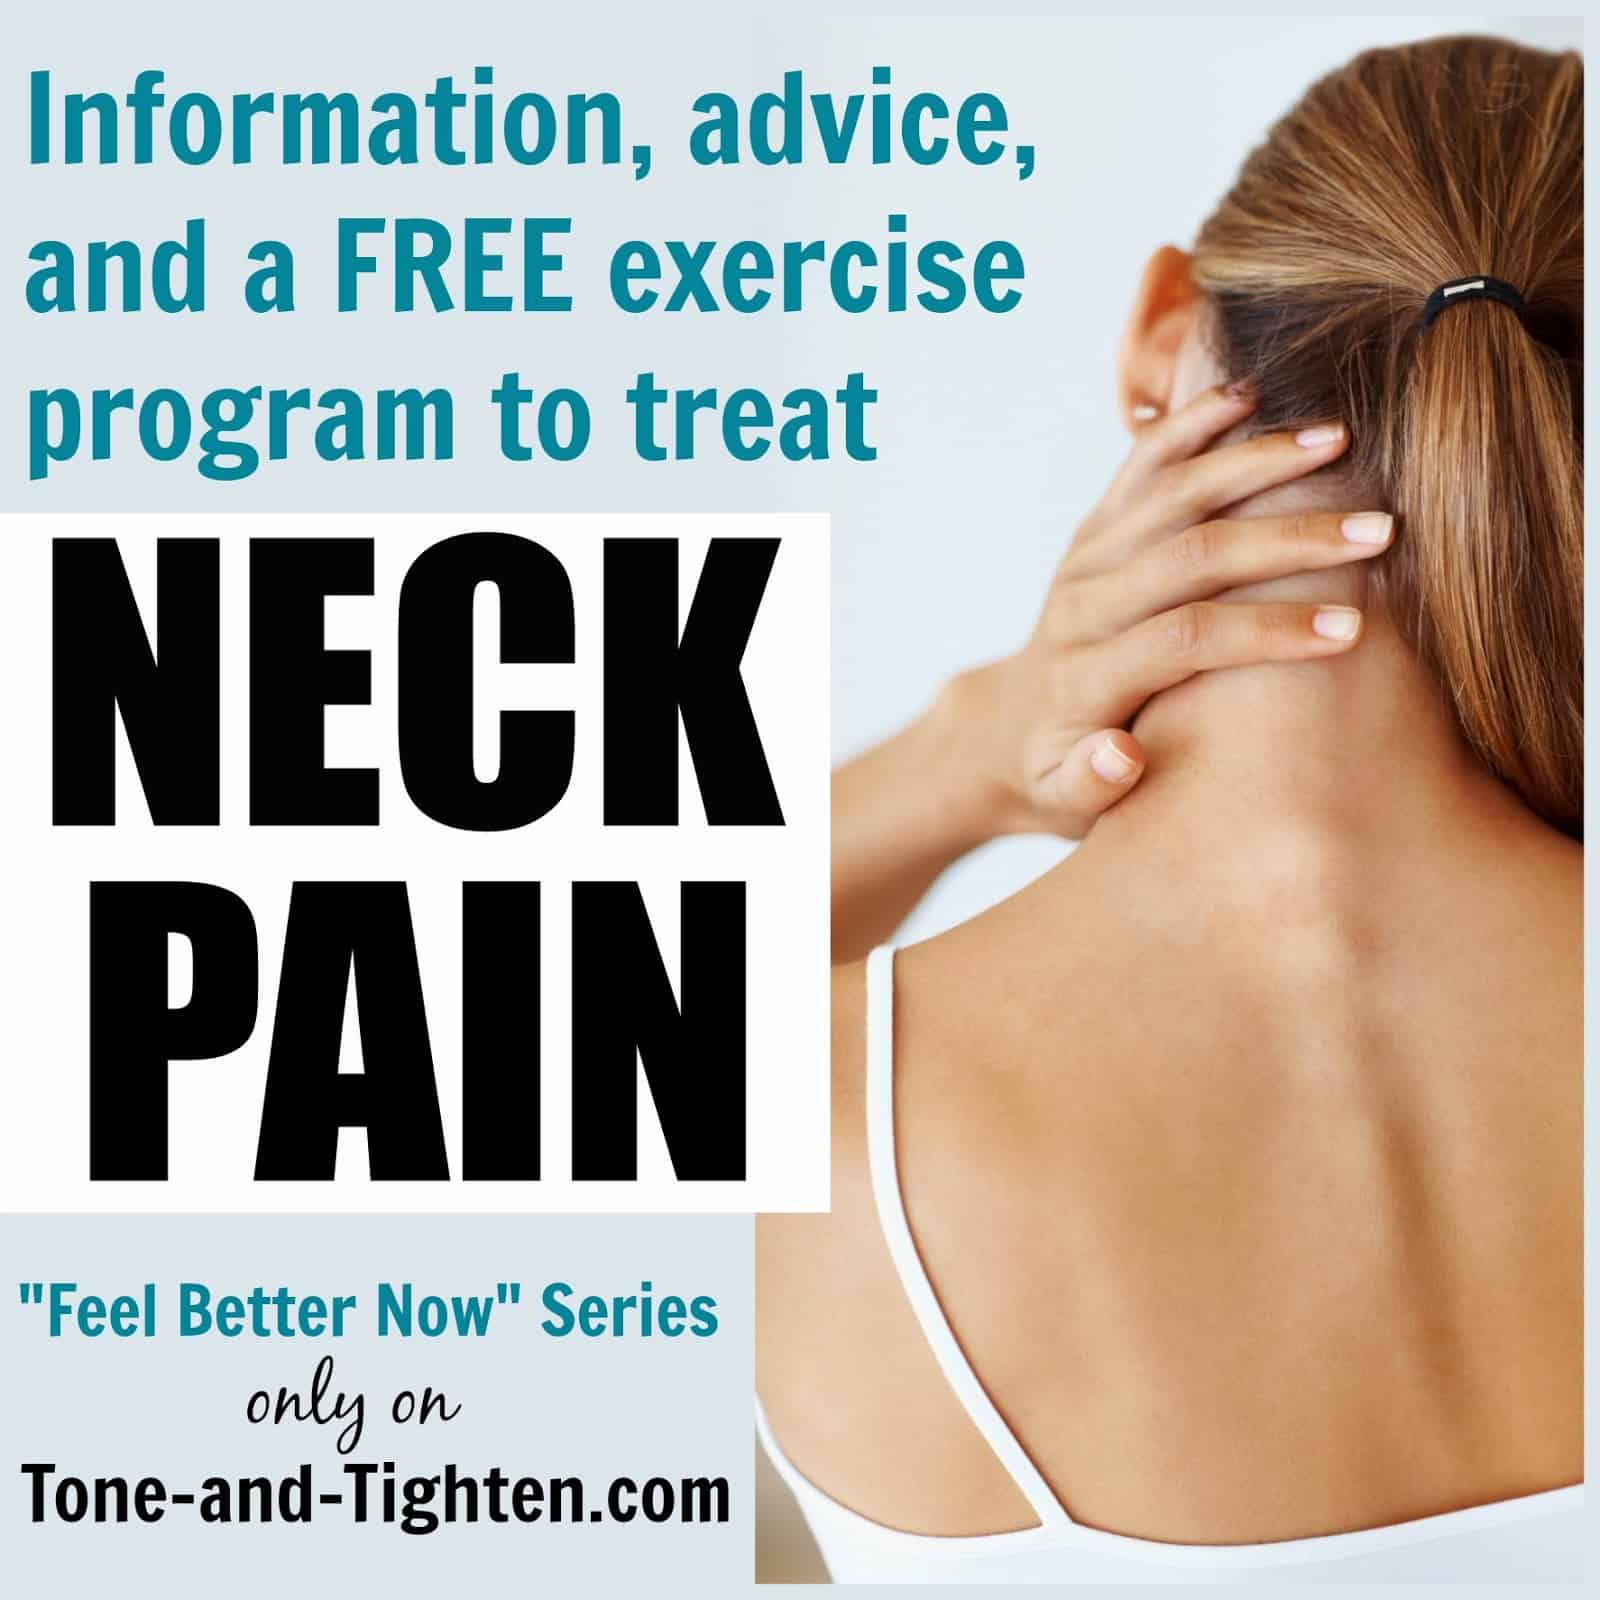 Feel Better Now Series â How to treat neck pain â Best exercises to ...